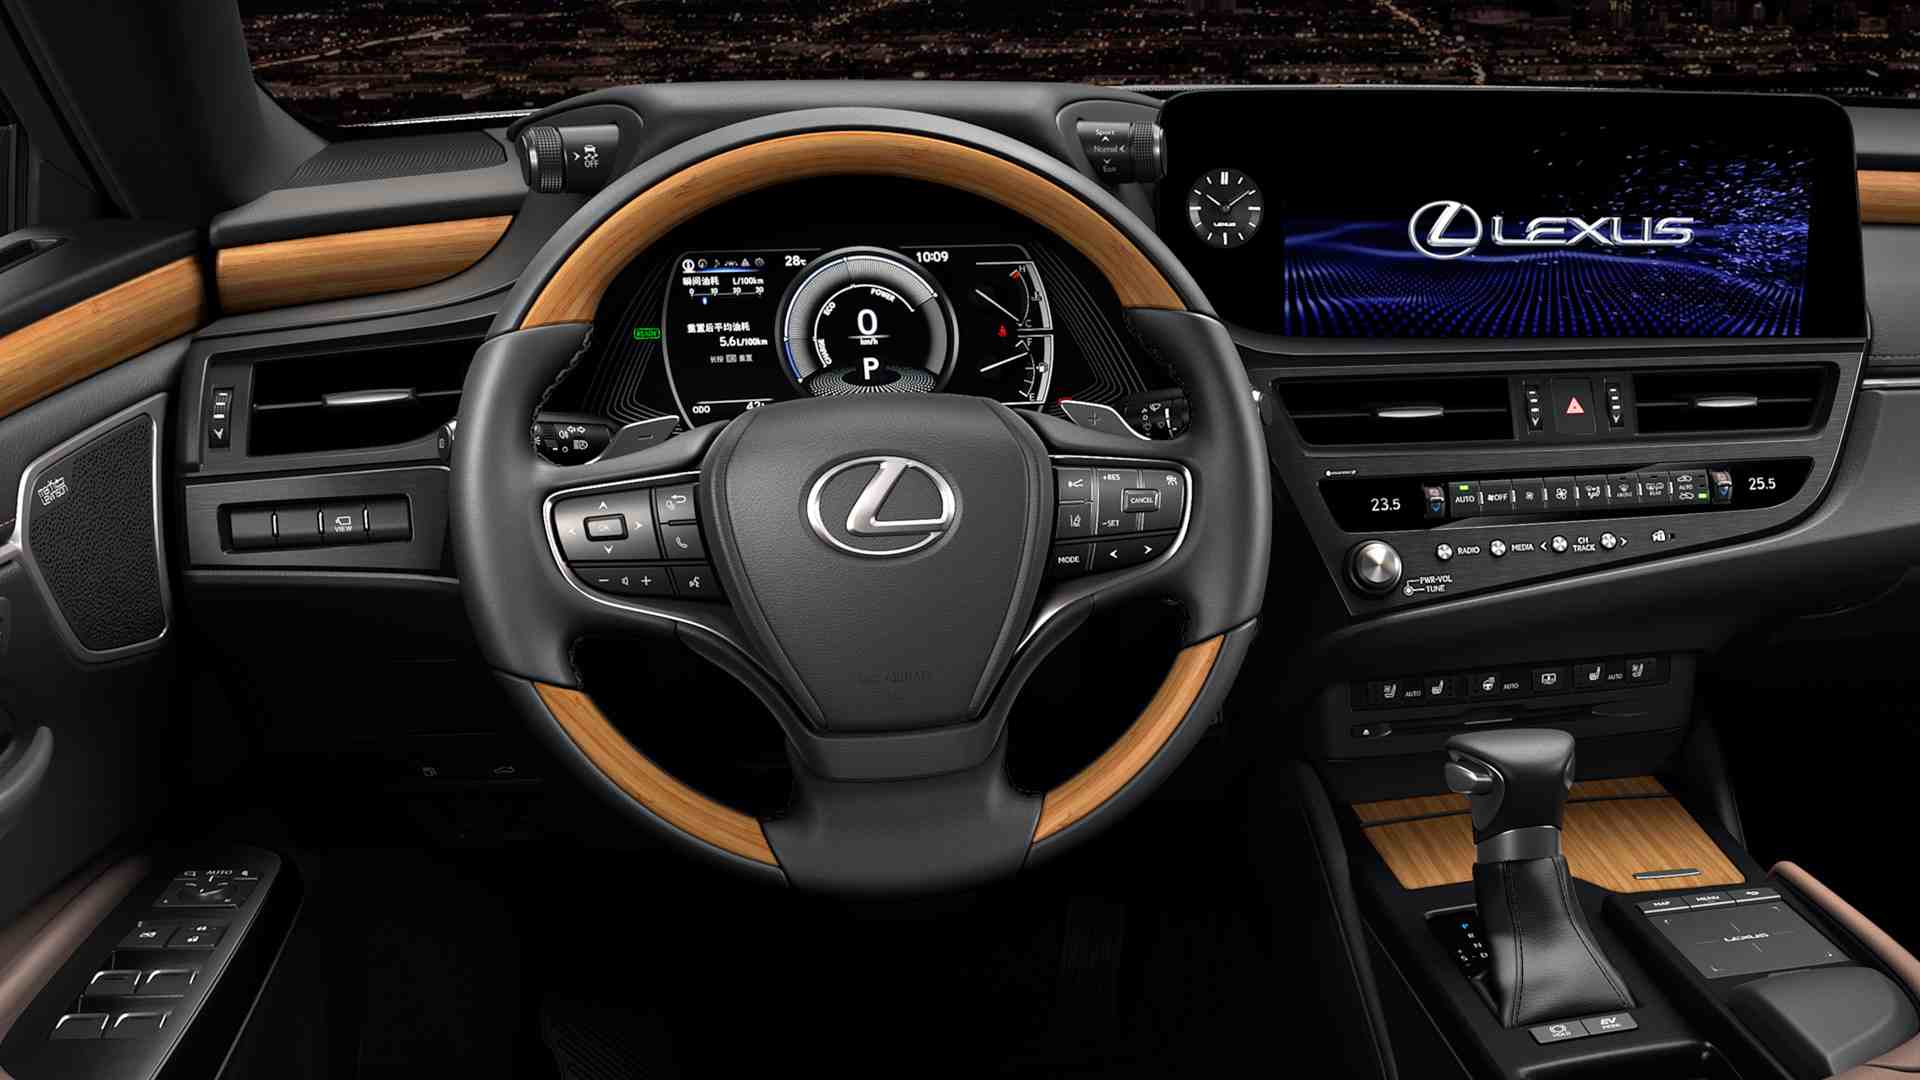 The main infotainment screen of the 2021 Lexus ES is now touch-operated. Image: Lexus